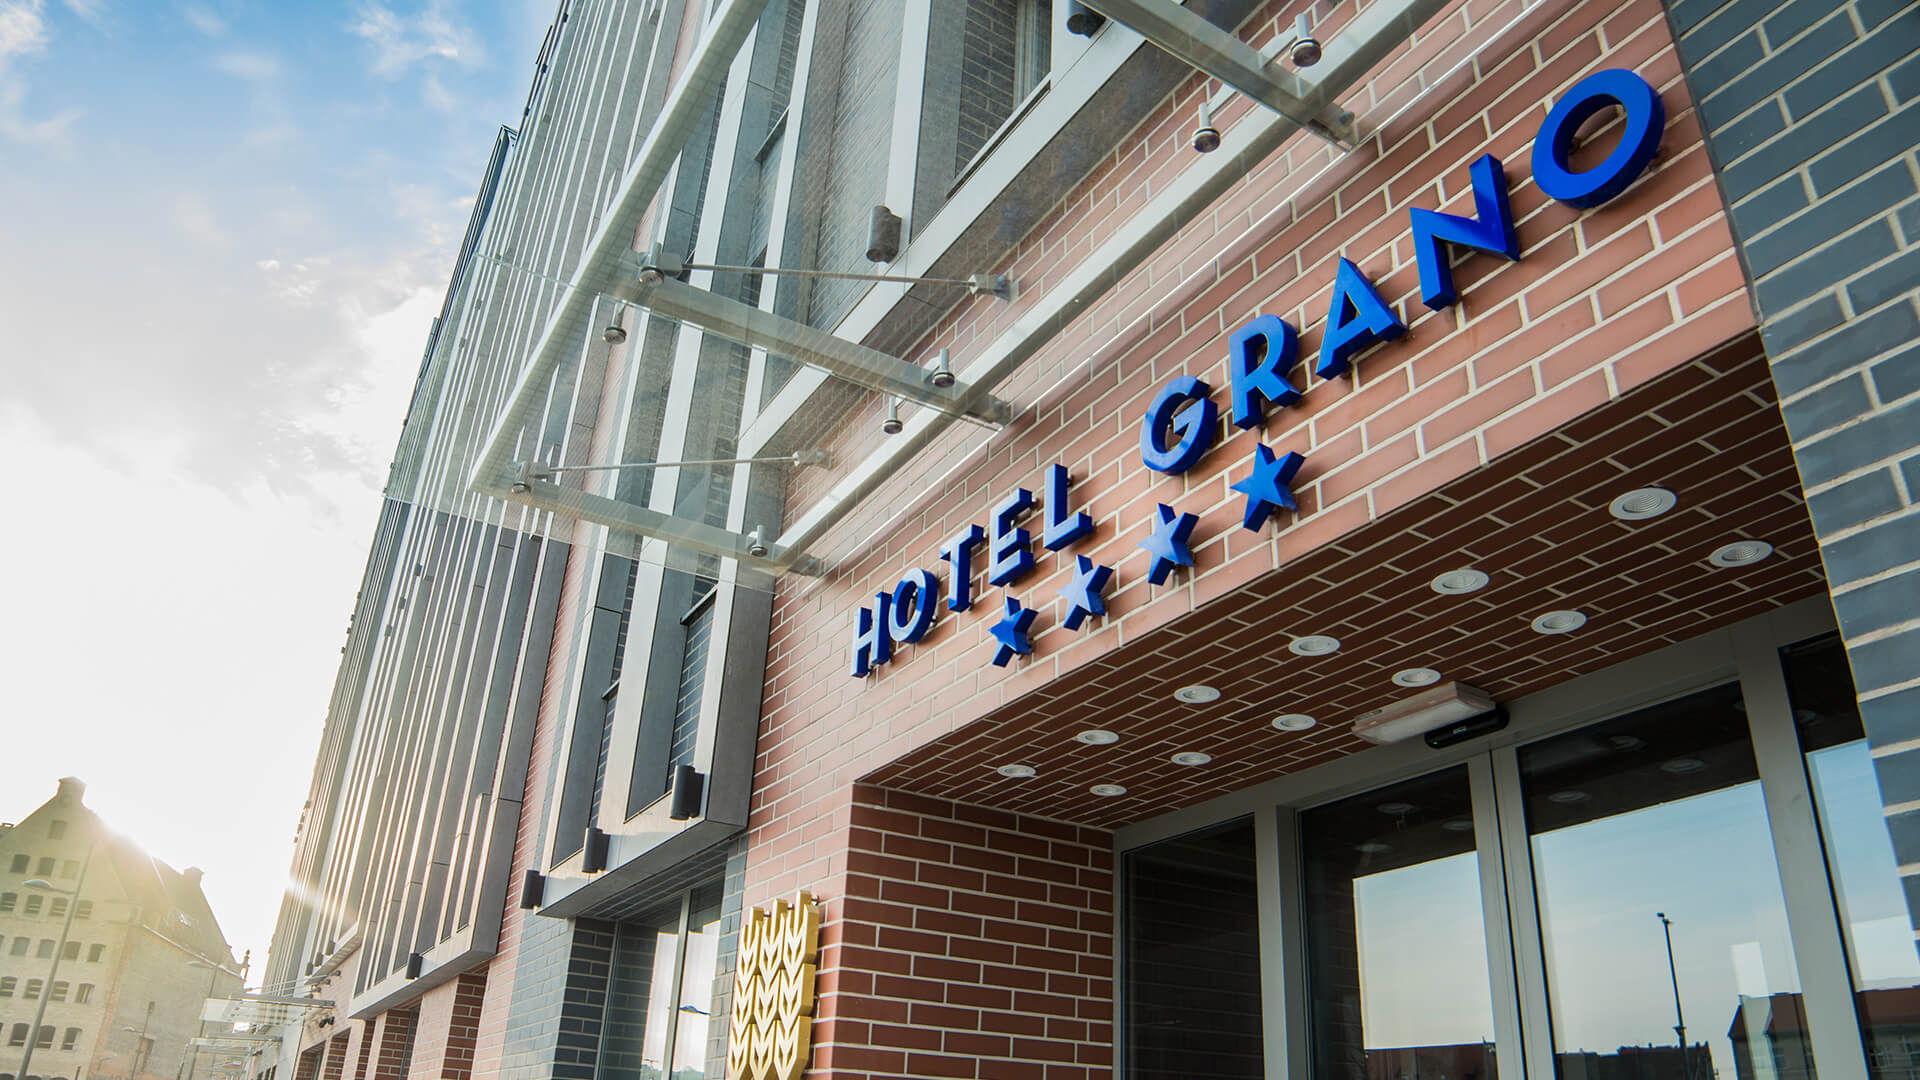 grano residence hotel appartamenti appartamenti - grano-residence-spatial lettering-backlit-blue lettering-above-the-hotel-entry lettering-mounted-on-a-frame lettering-on-a-frame company logo-3d-gdansk